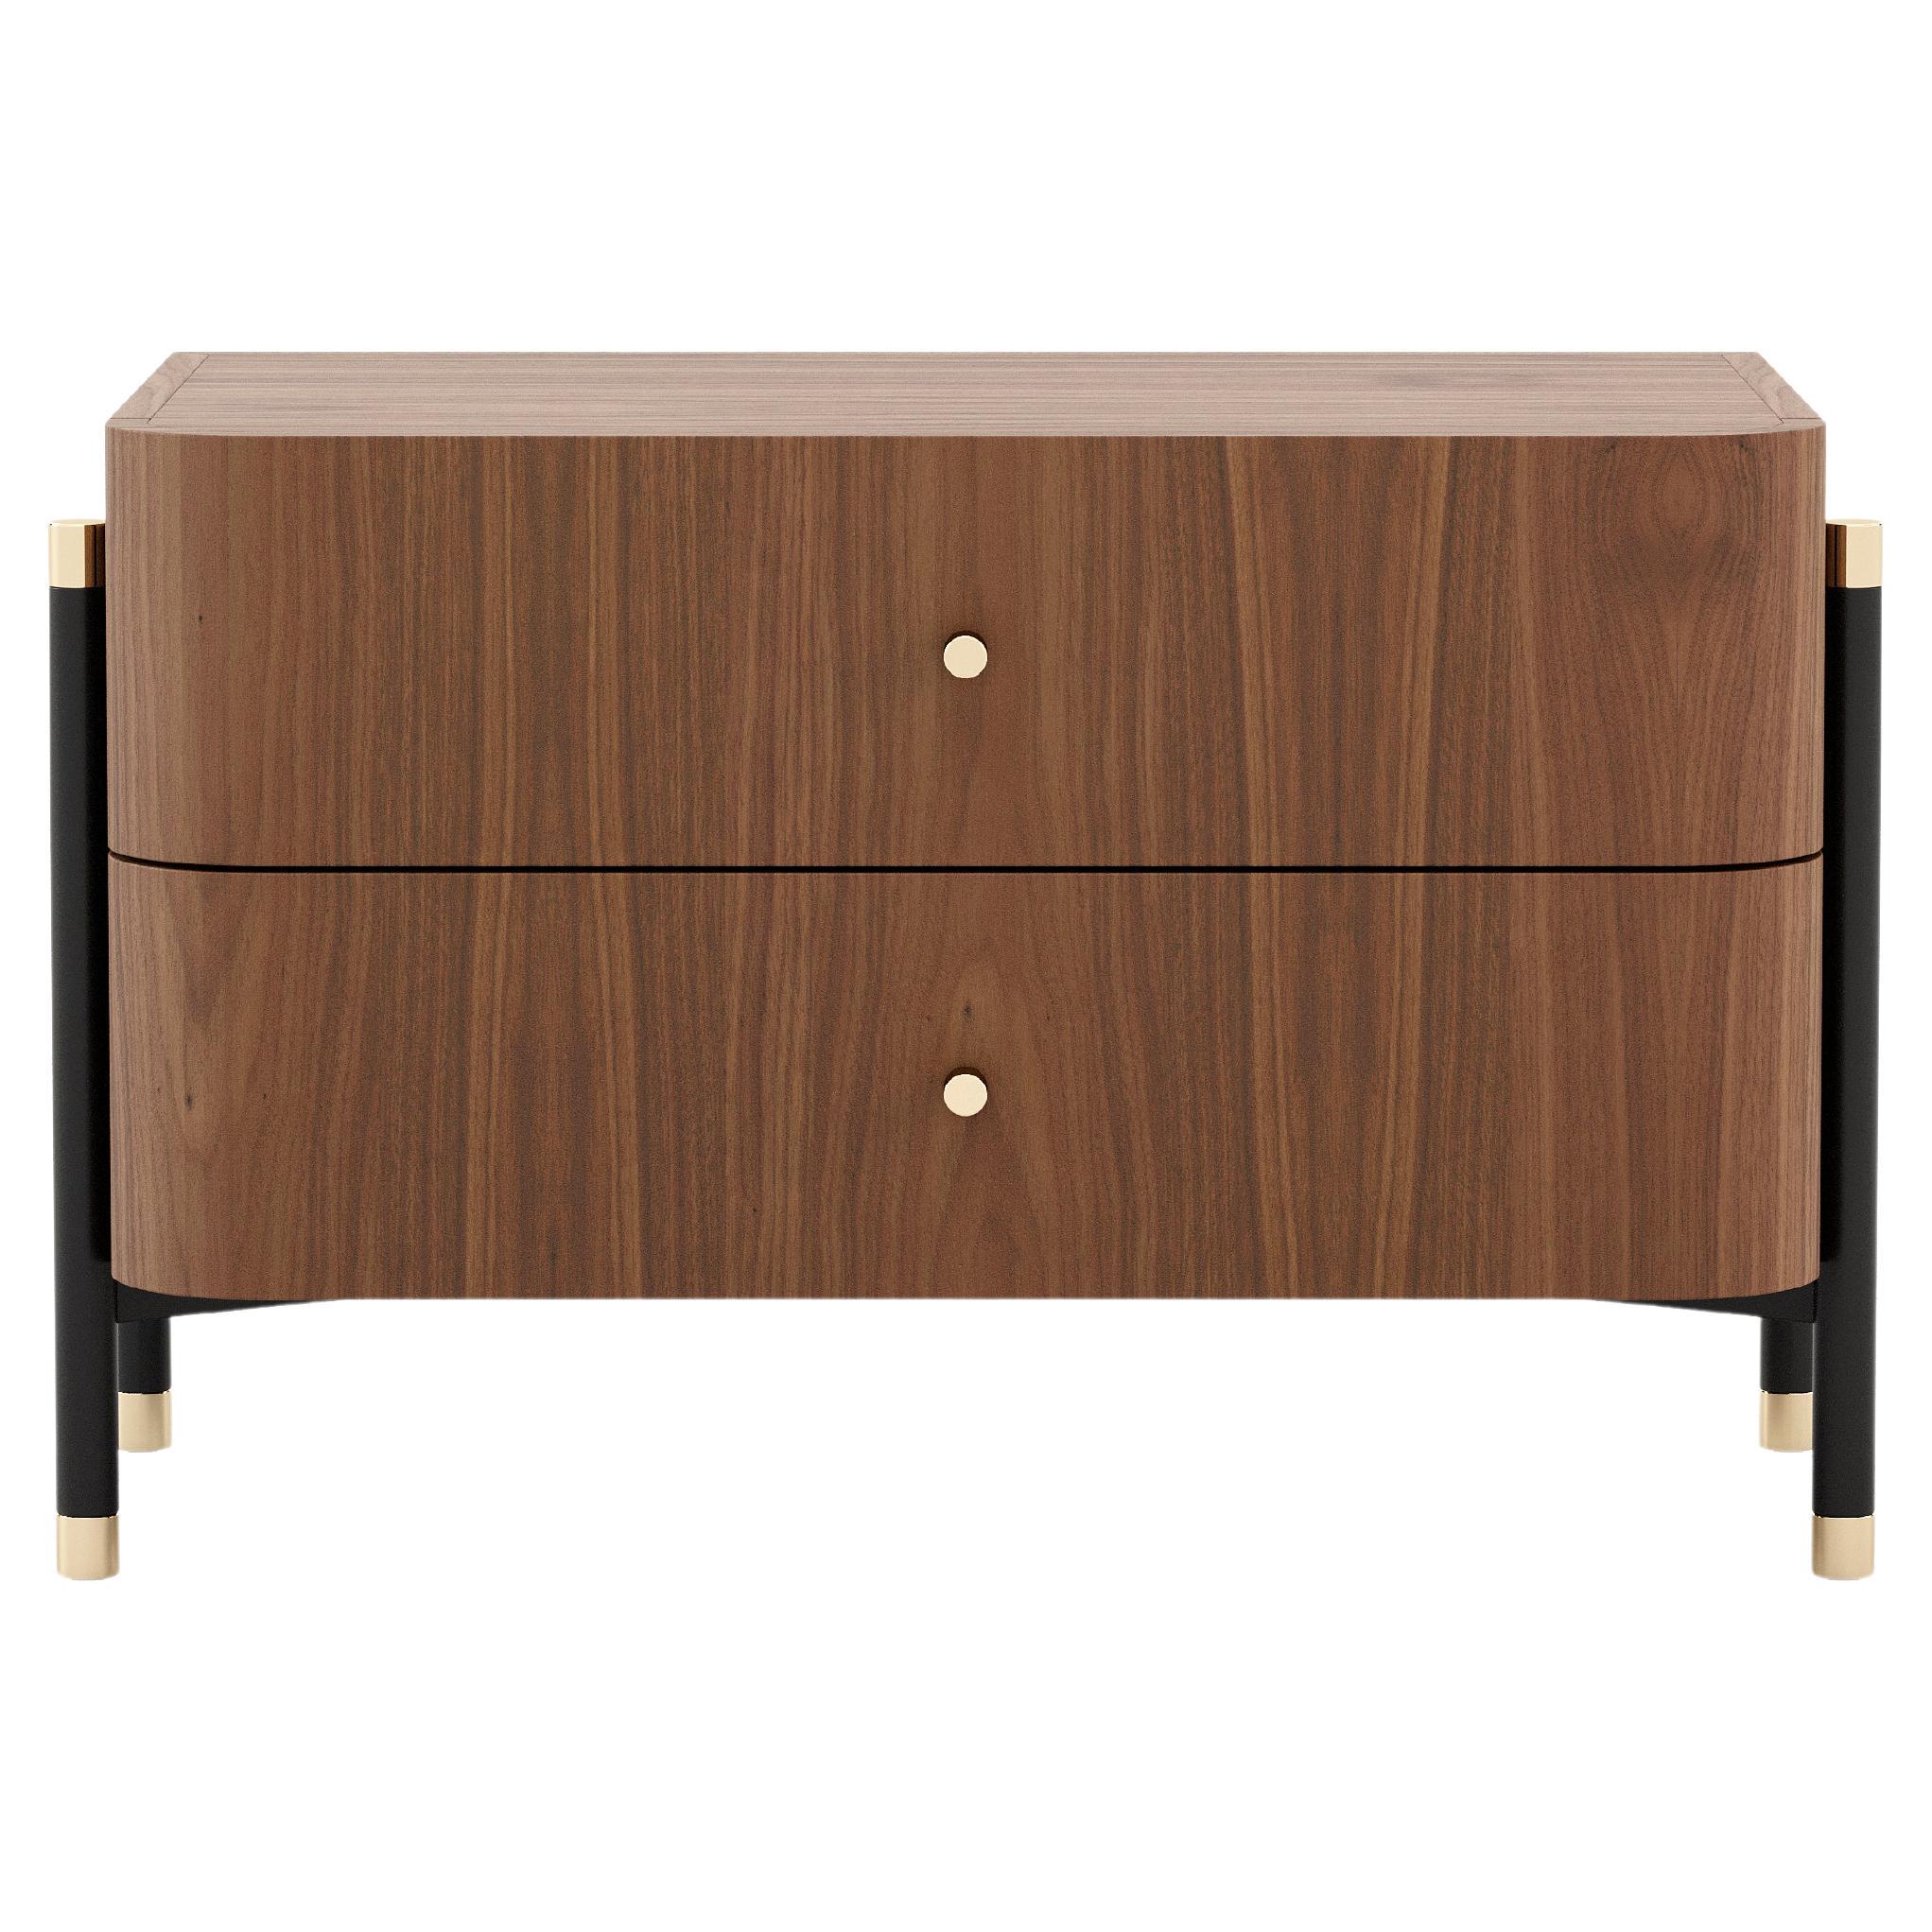 21st-century Contemporary bedside table, finished in customisable wood veneer For Sale